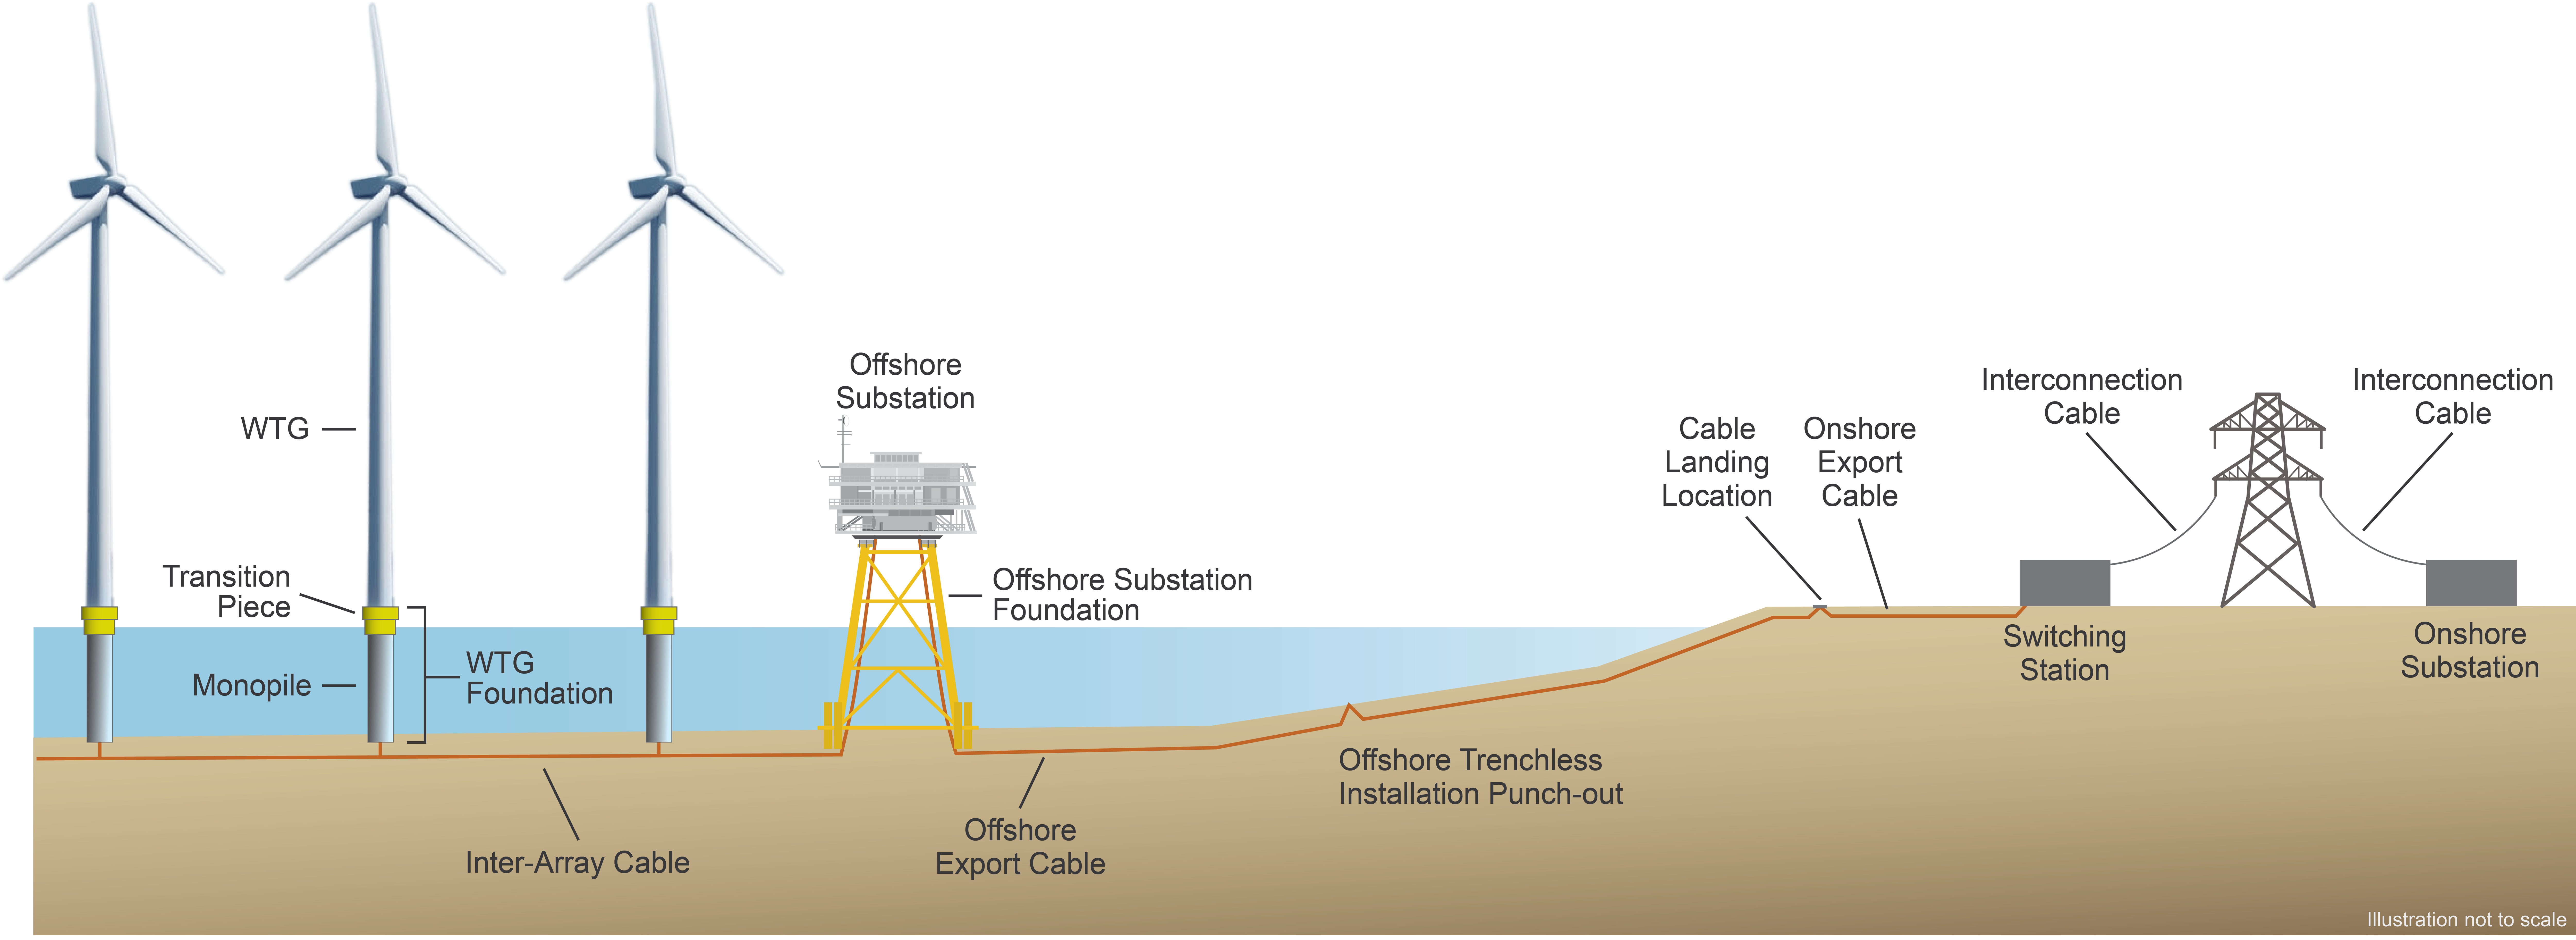 Coastal Virginia Offshore Wind project infographic showing parts of the turbines and on-shore infrastructure